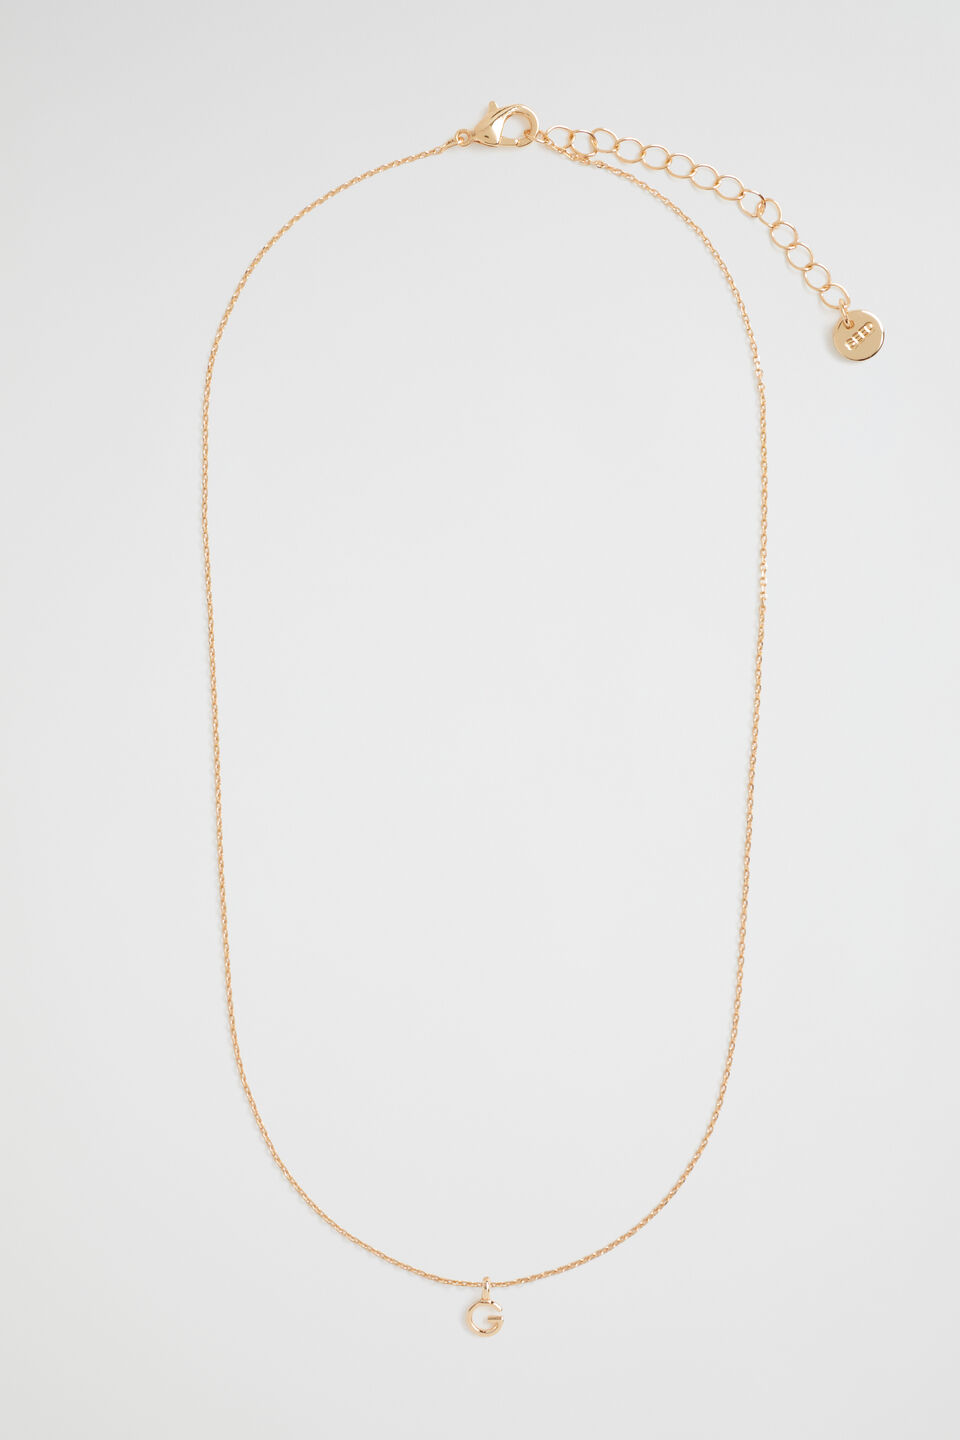 Gold Initial Necklace  G